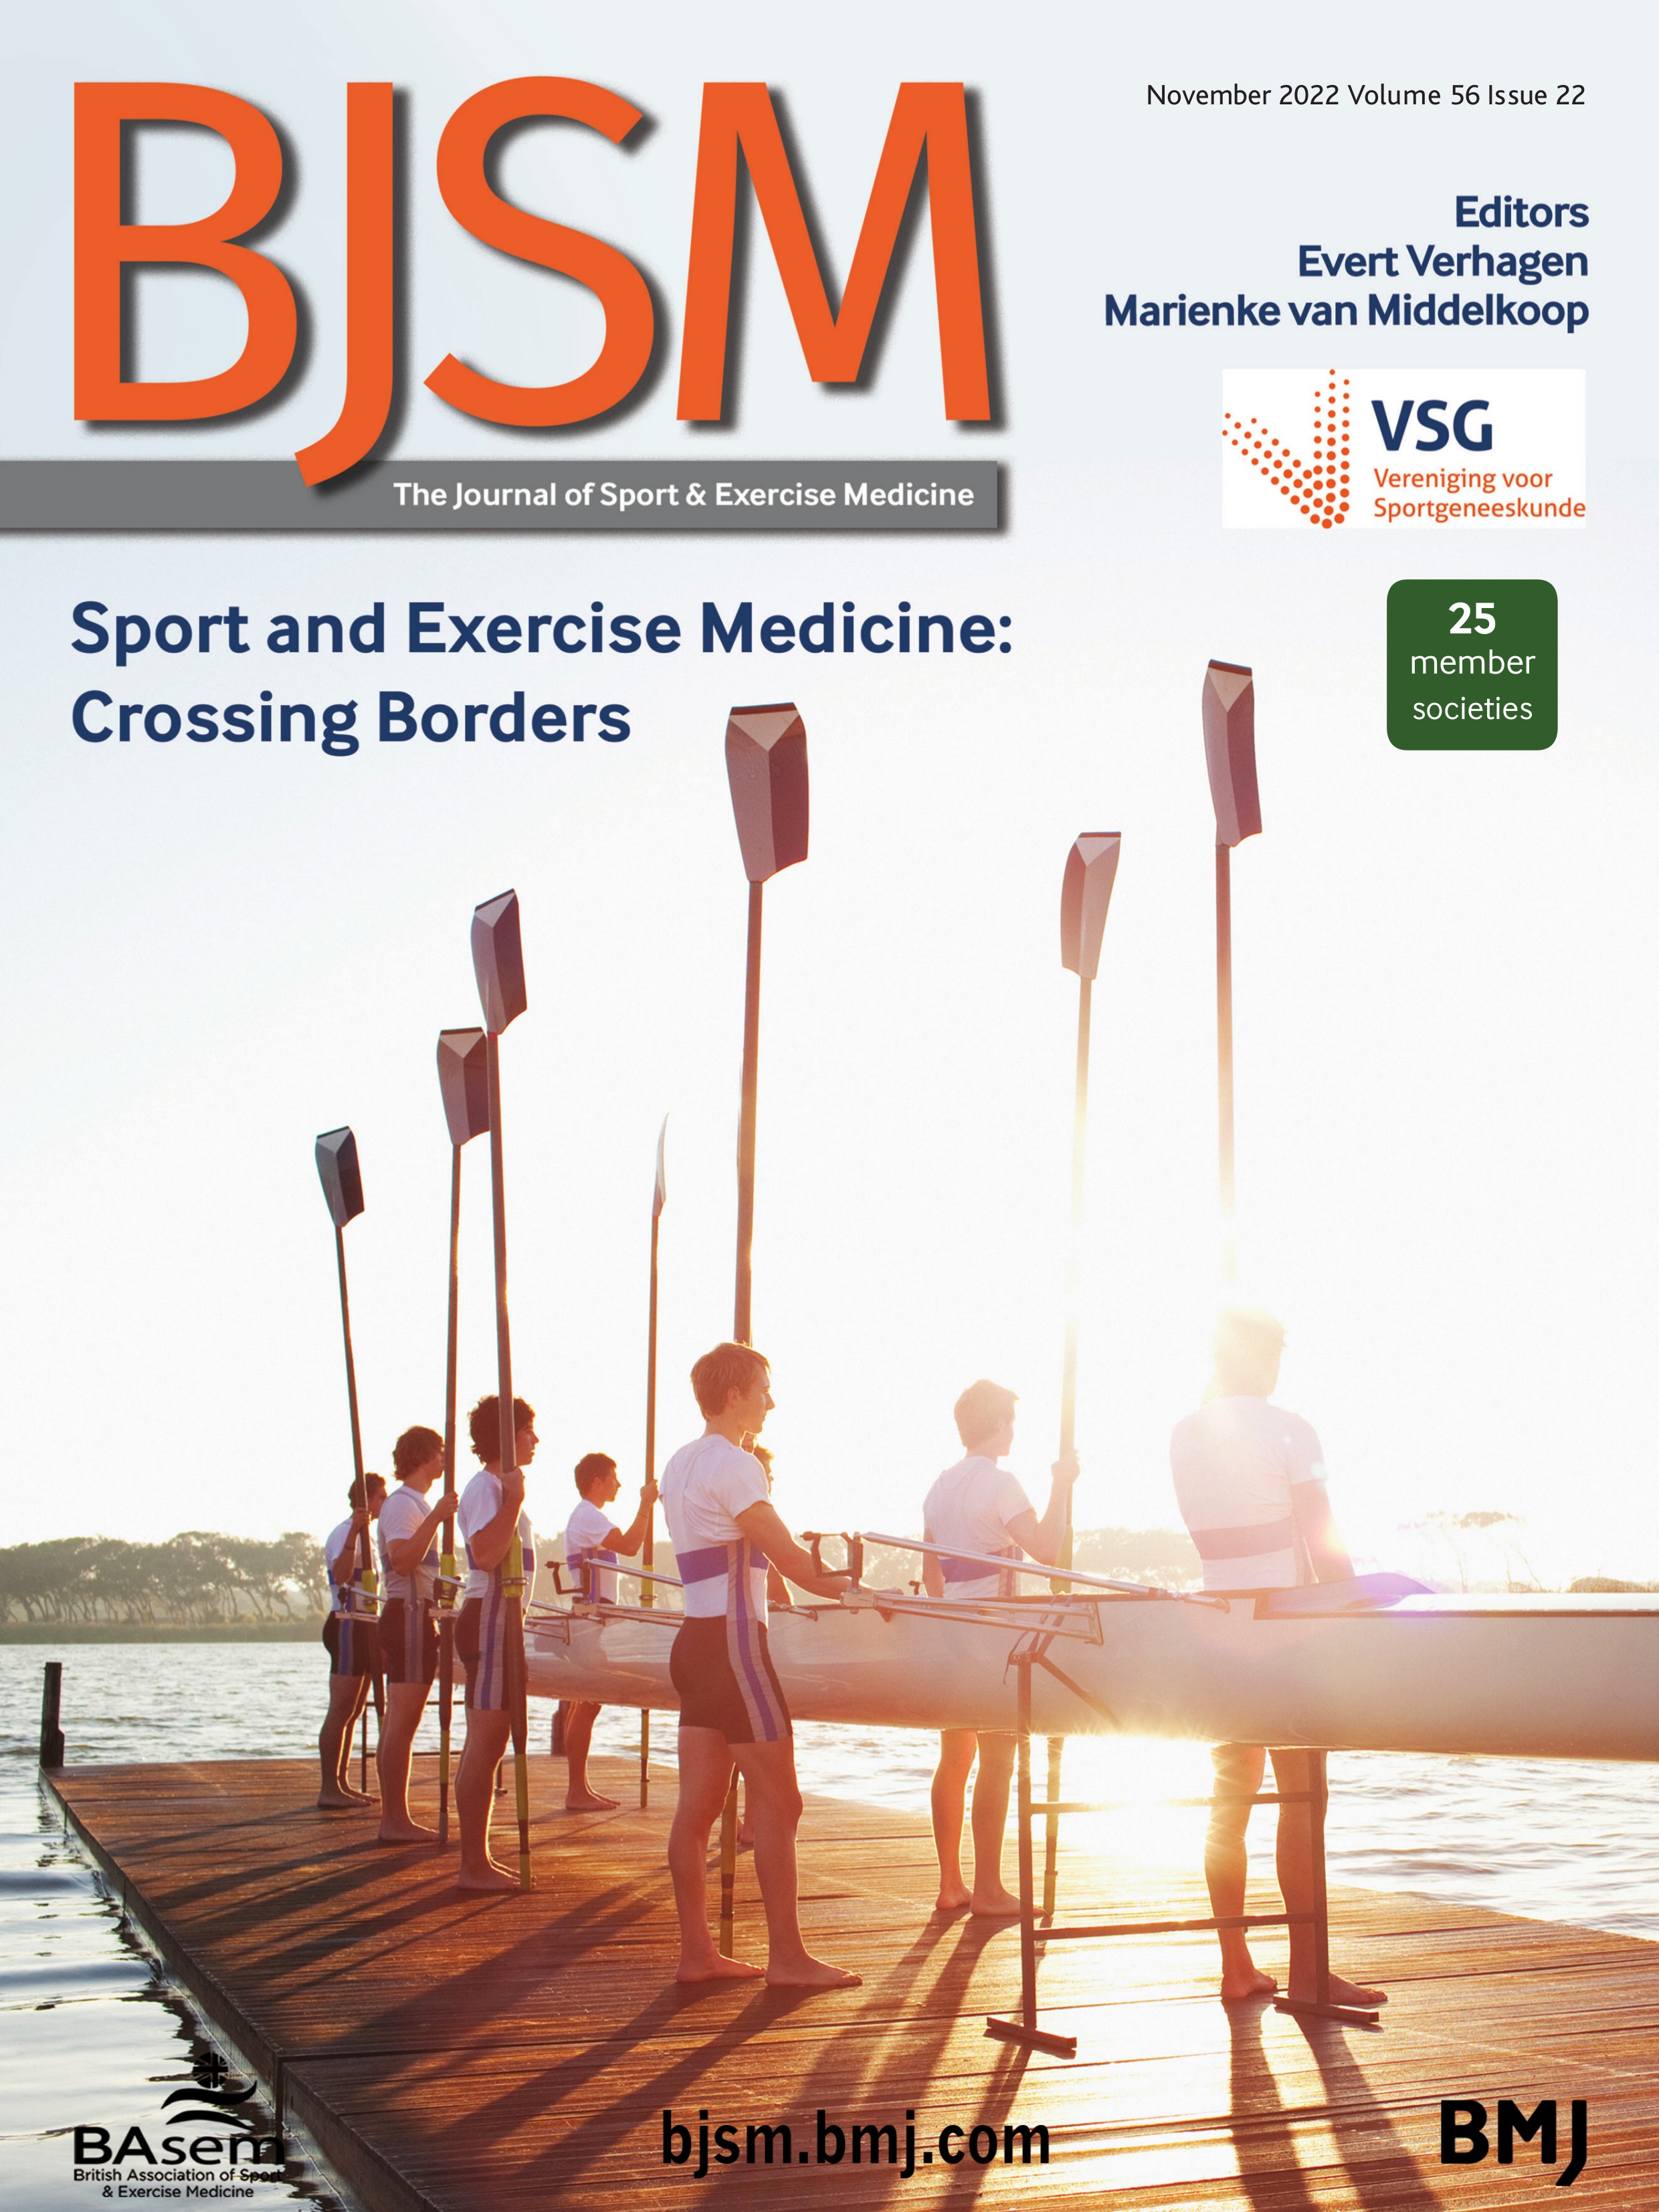 Independent and joint associations of weightlifting and aerobic activity with all-cause, cardiovascular disease and cancer mortality in the Prostate, Lung, Colorectal and Ovarian Cancer Screening Trial